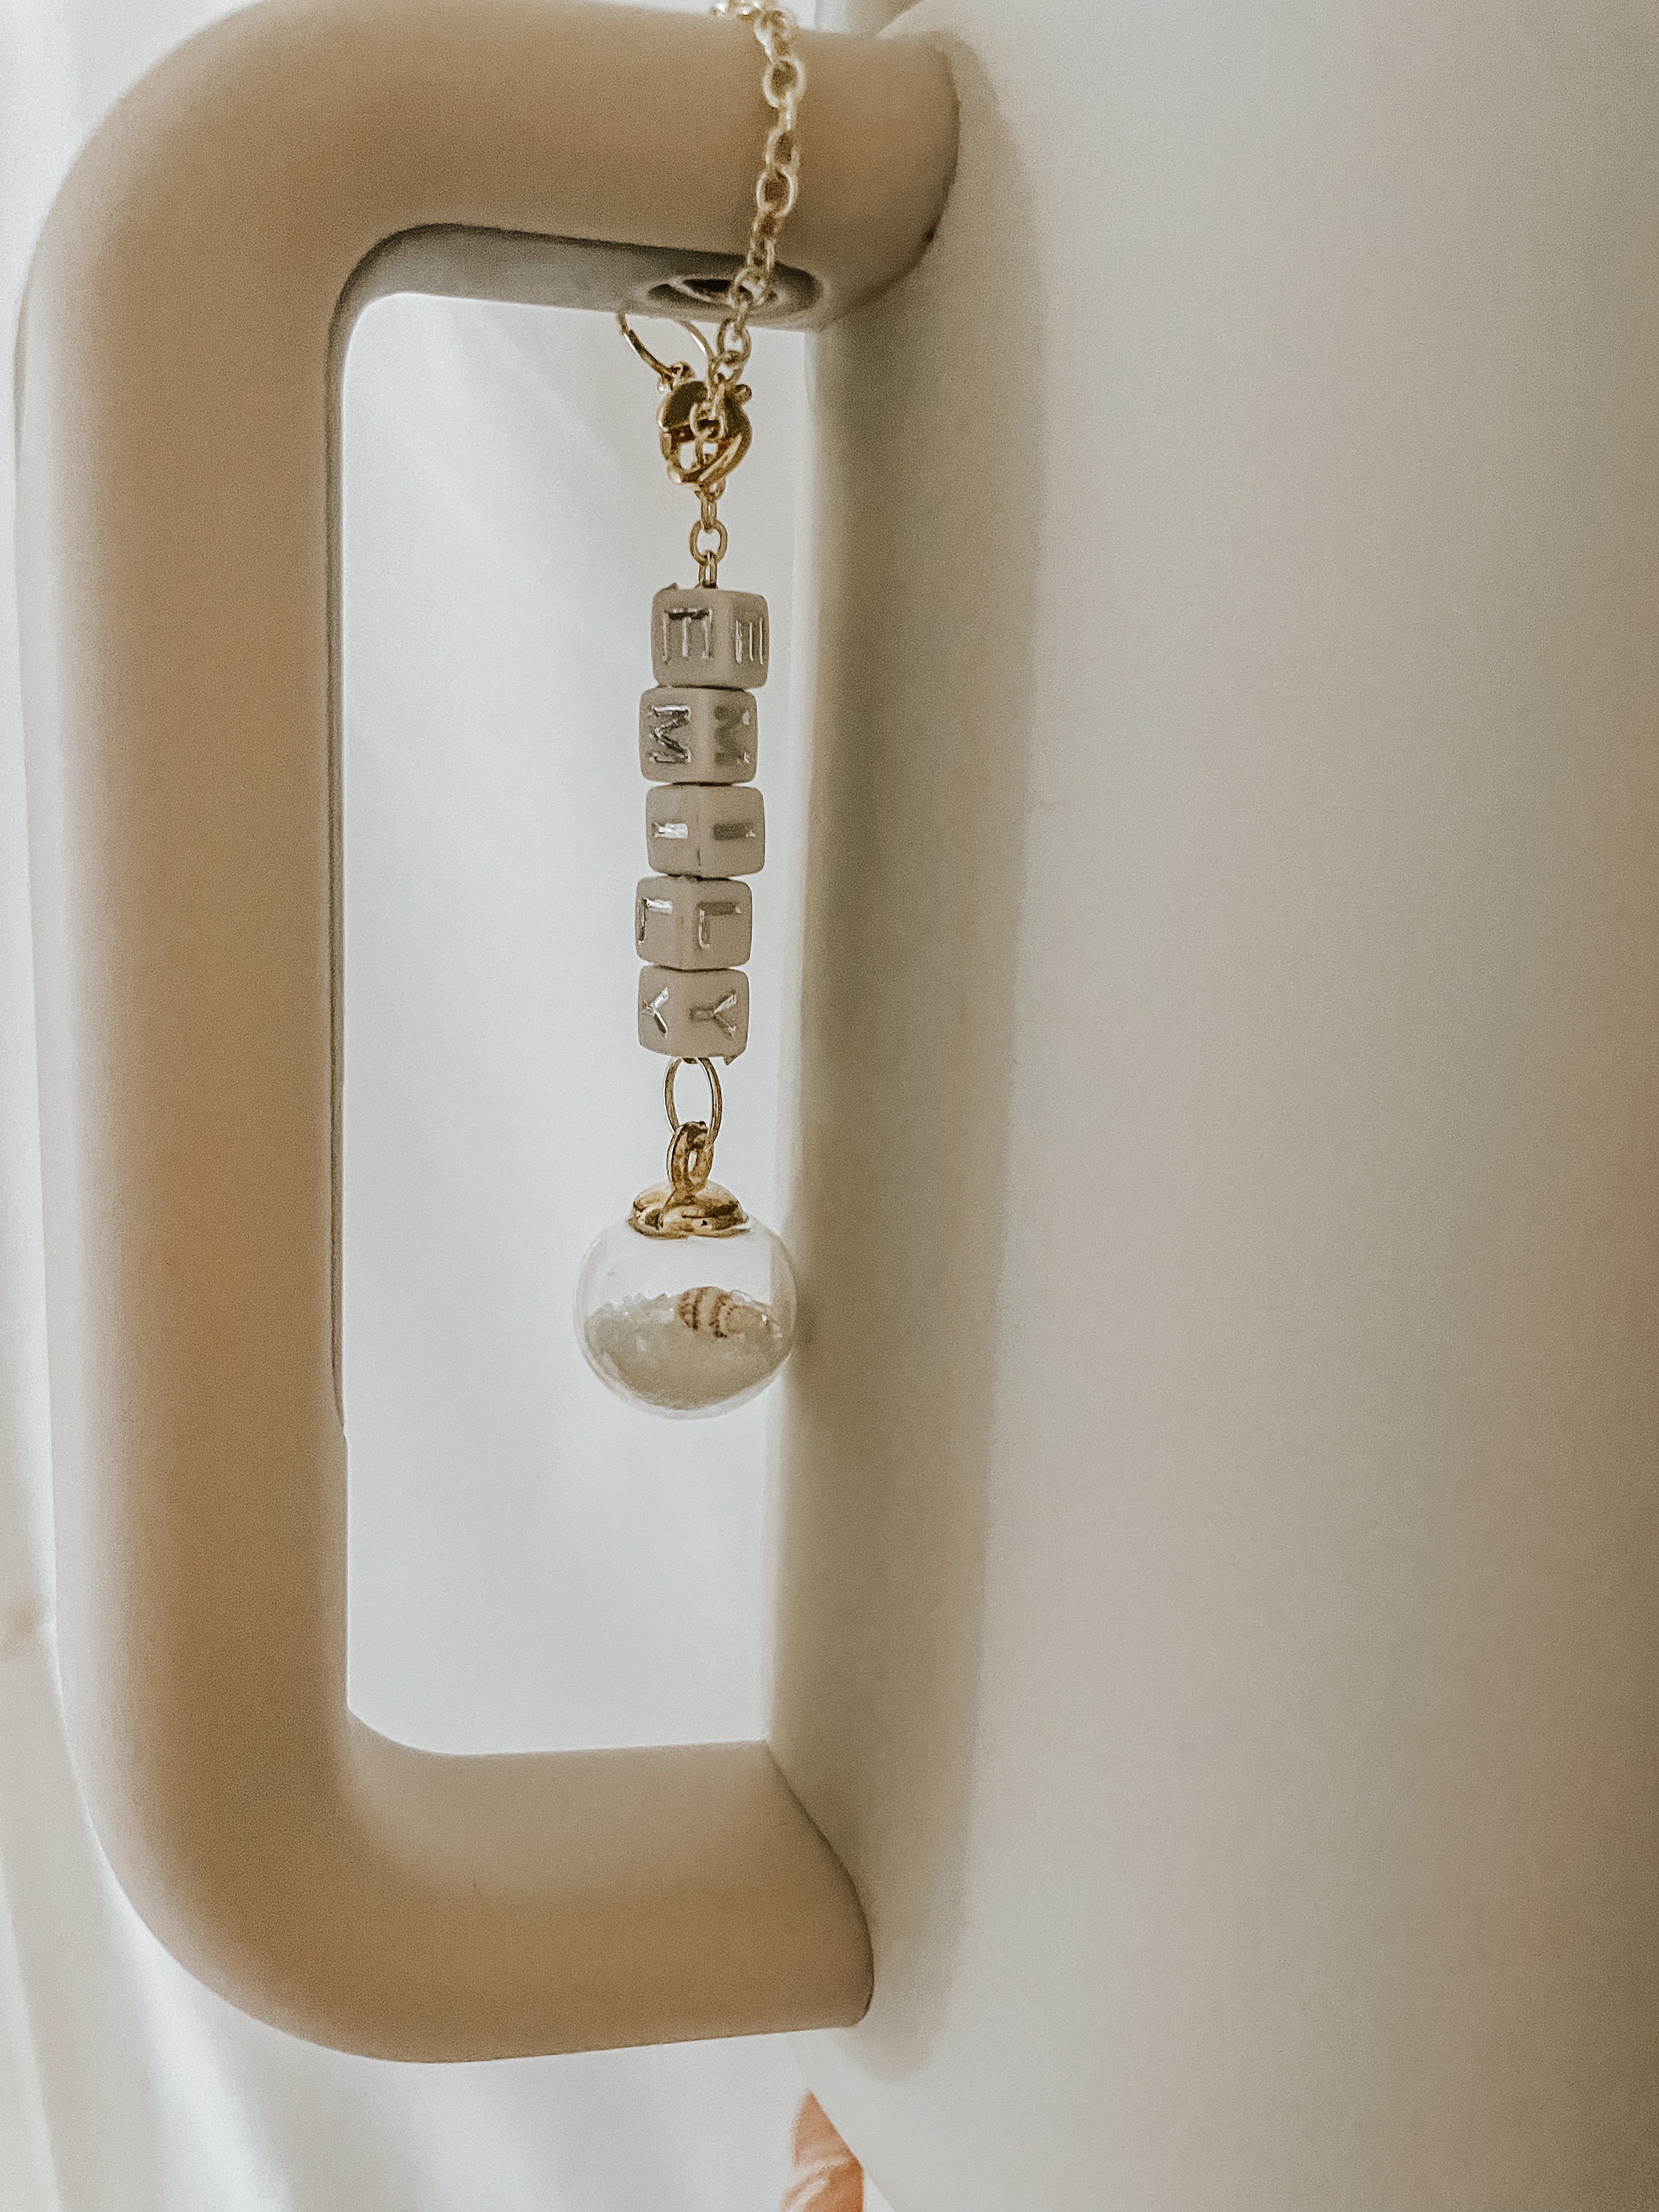 Stanley Cup Charms – BRACHA